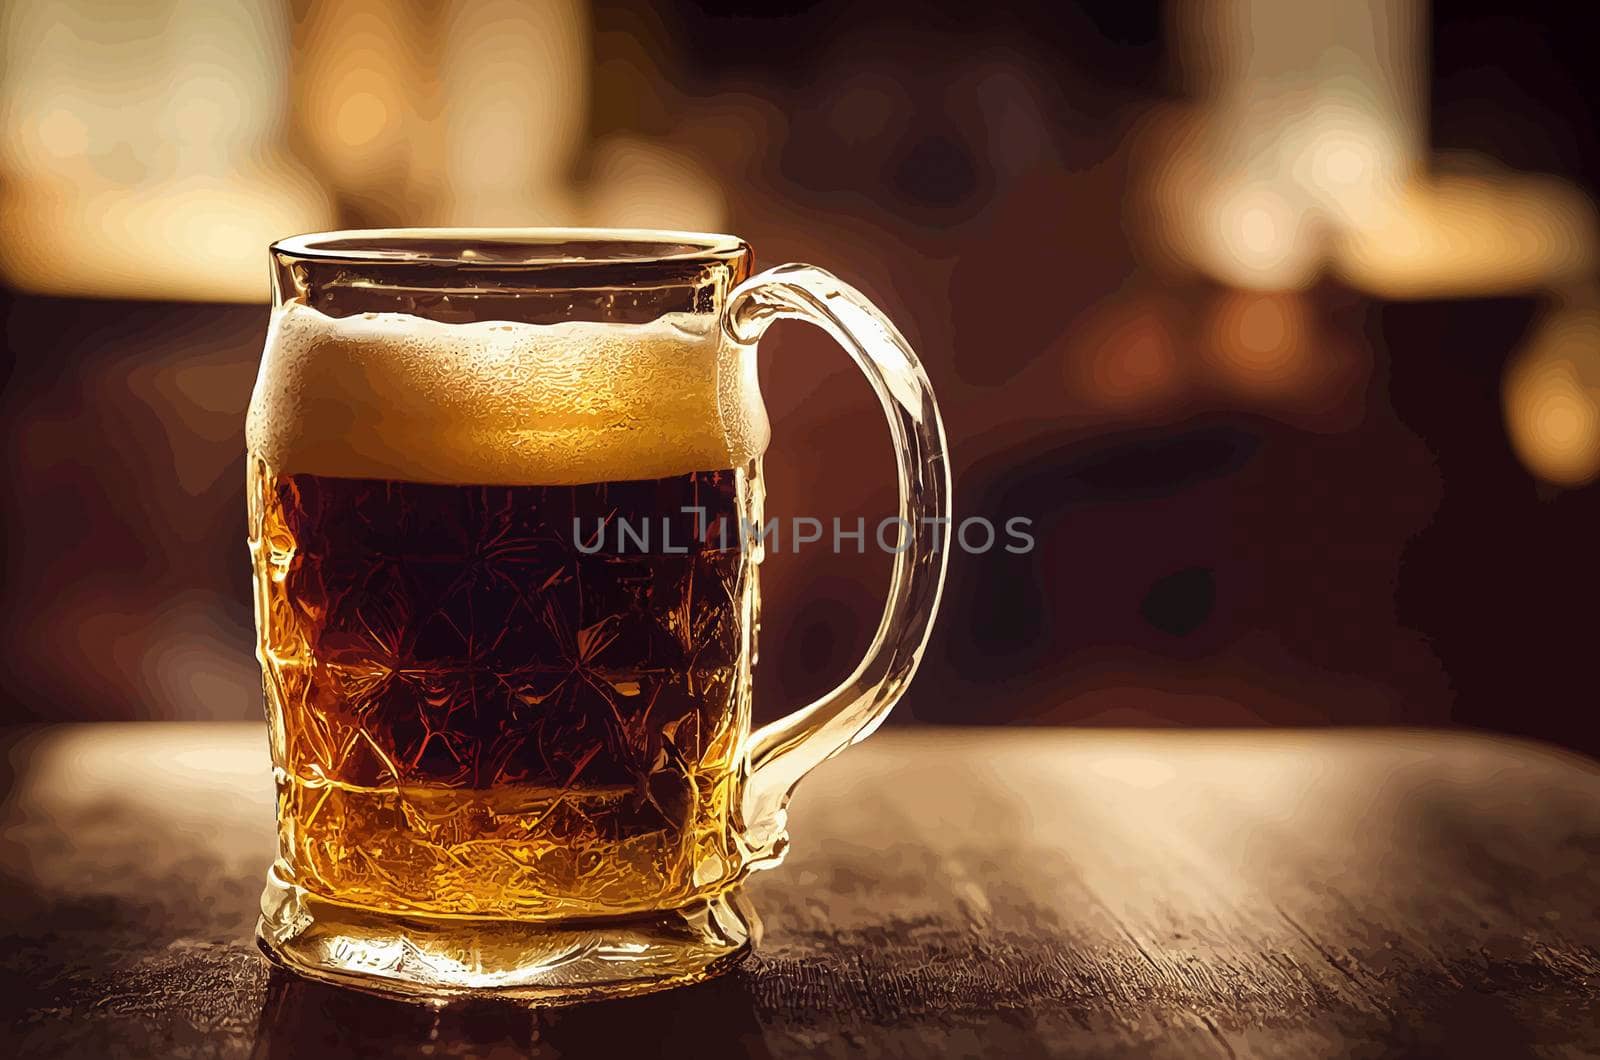 illustration of a mug of cold beer on a wooden table.